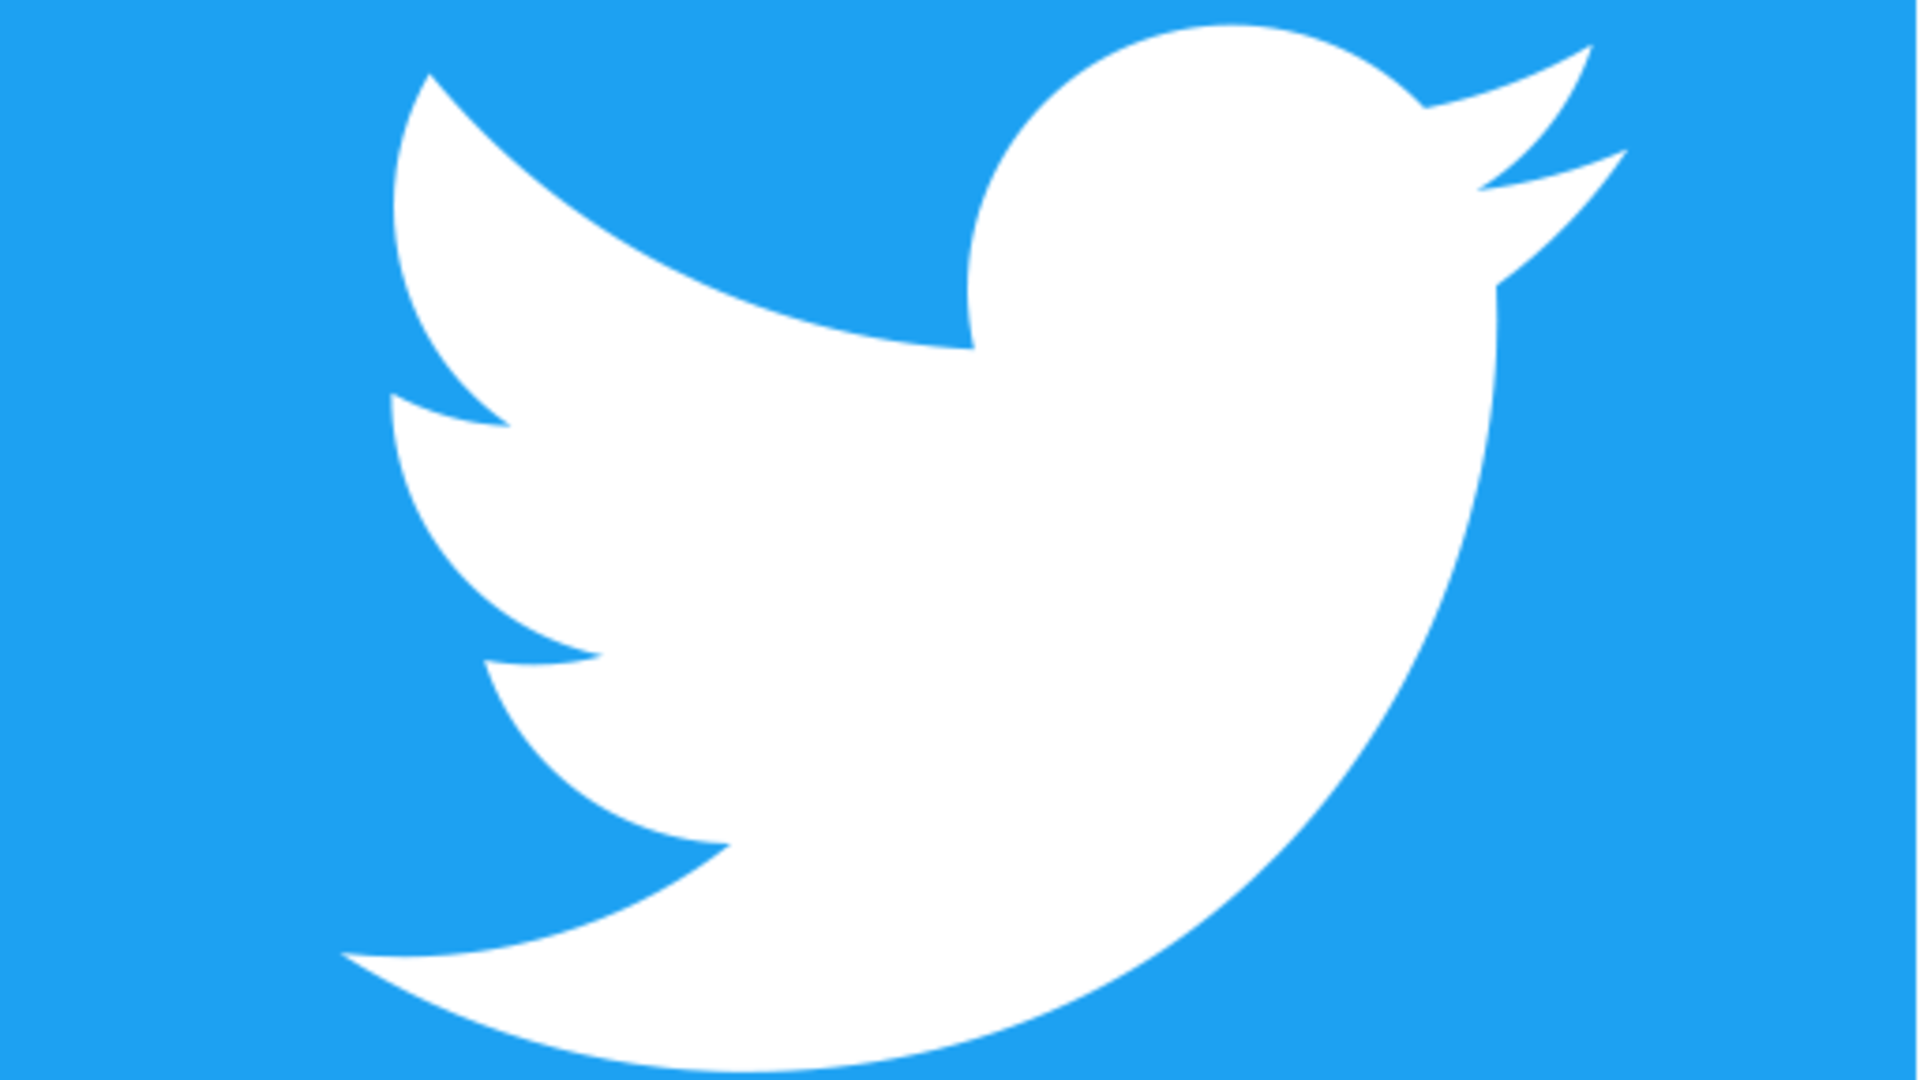 Upcoming Twitter features: Voice and video calls, encrypted messaging 